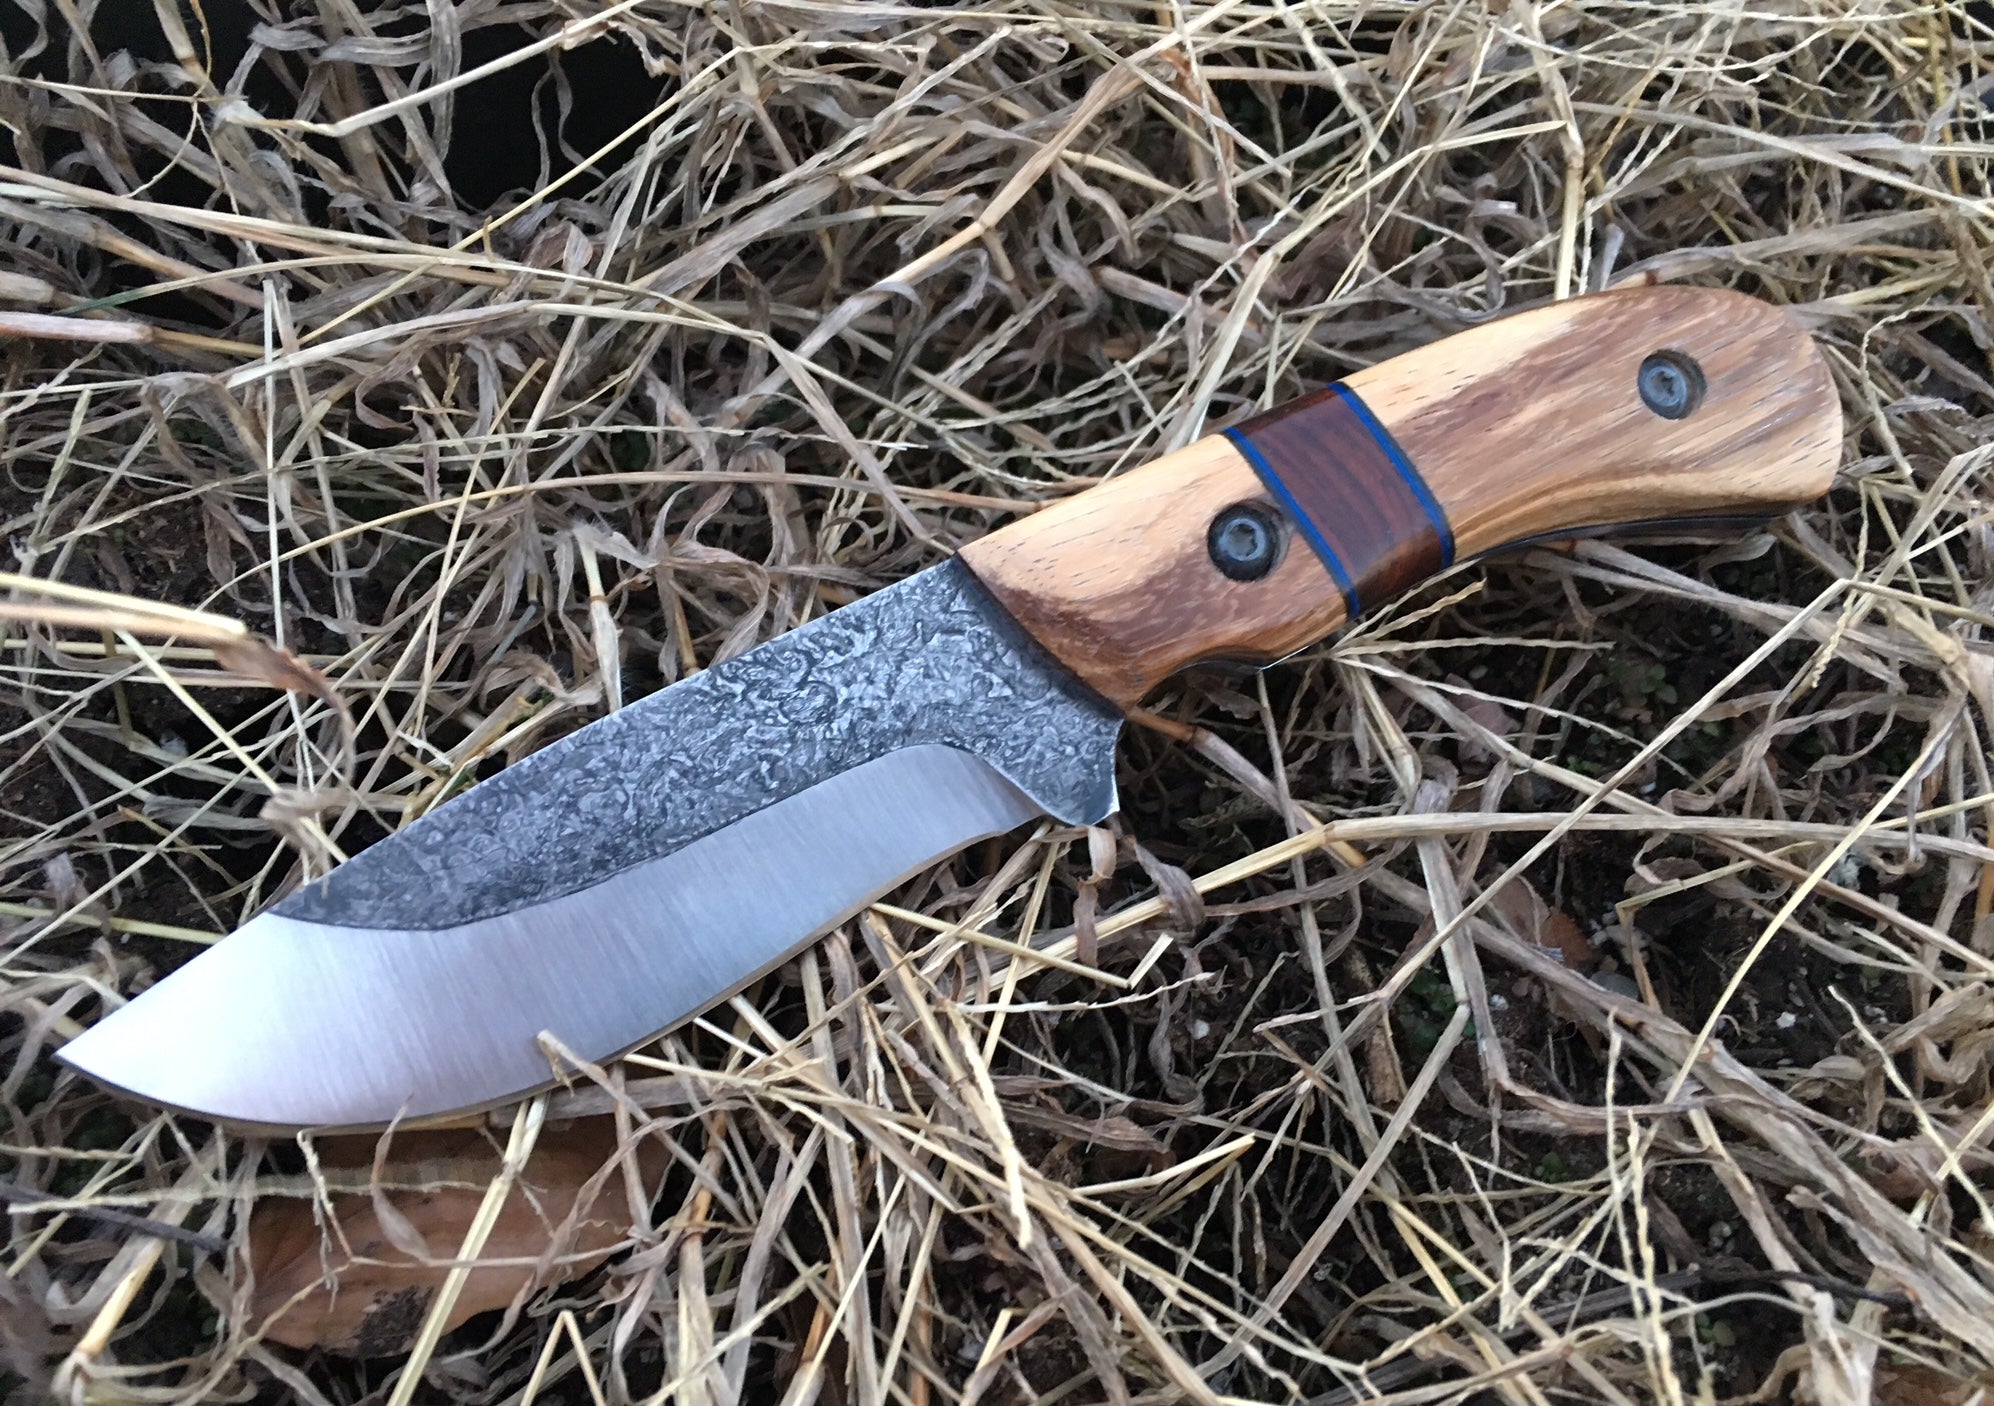 The Complete Online Guide to Knifemaking, MOUNTING HANDLES – Berg